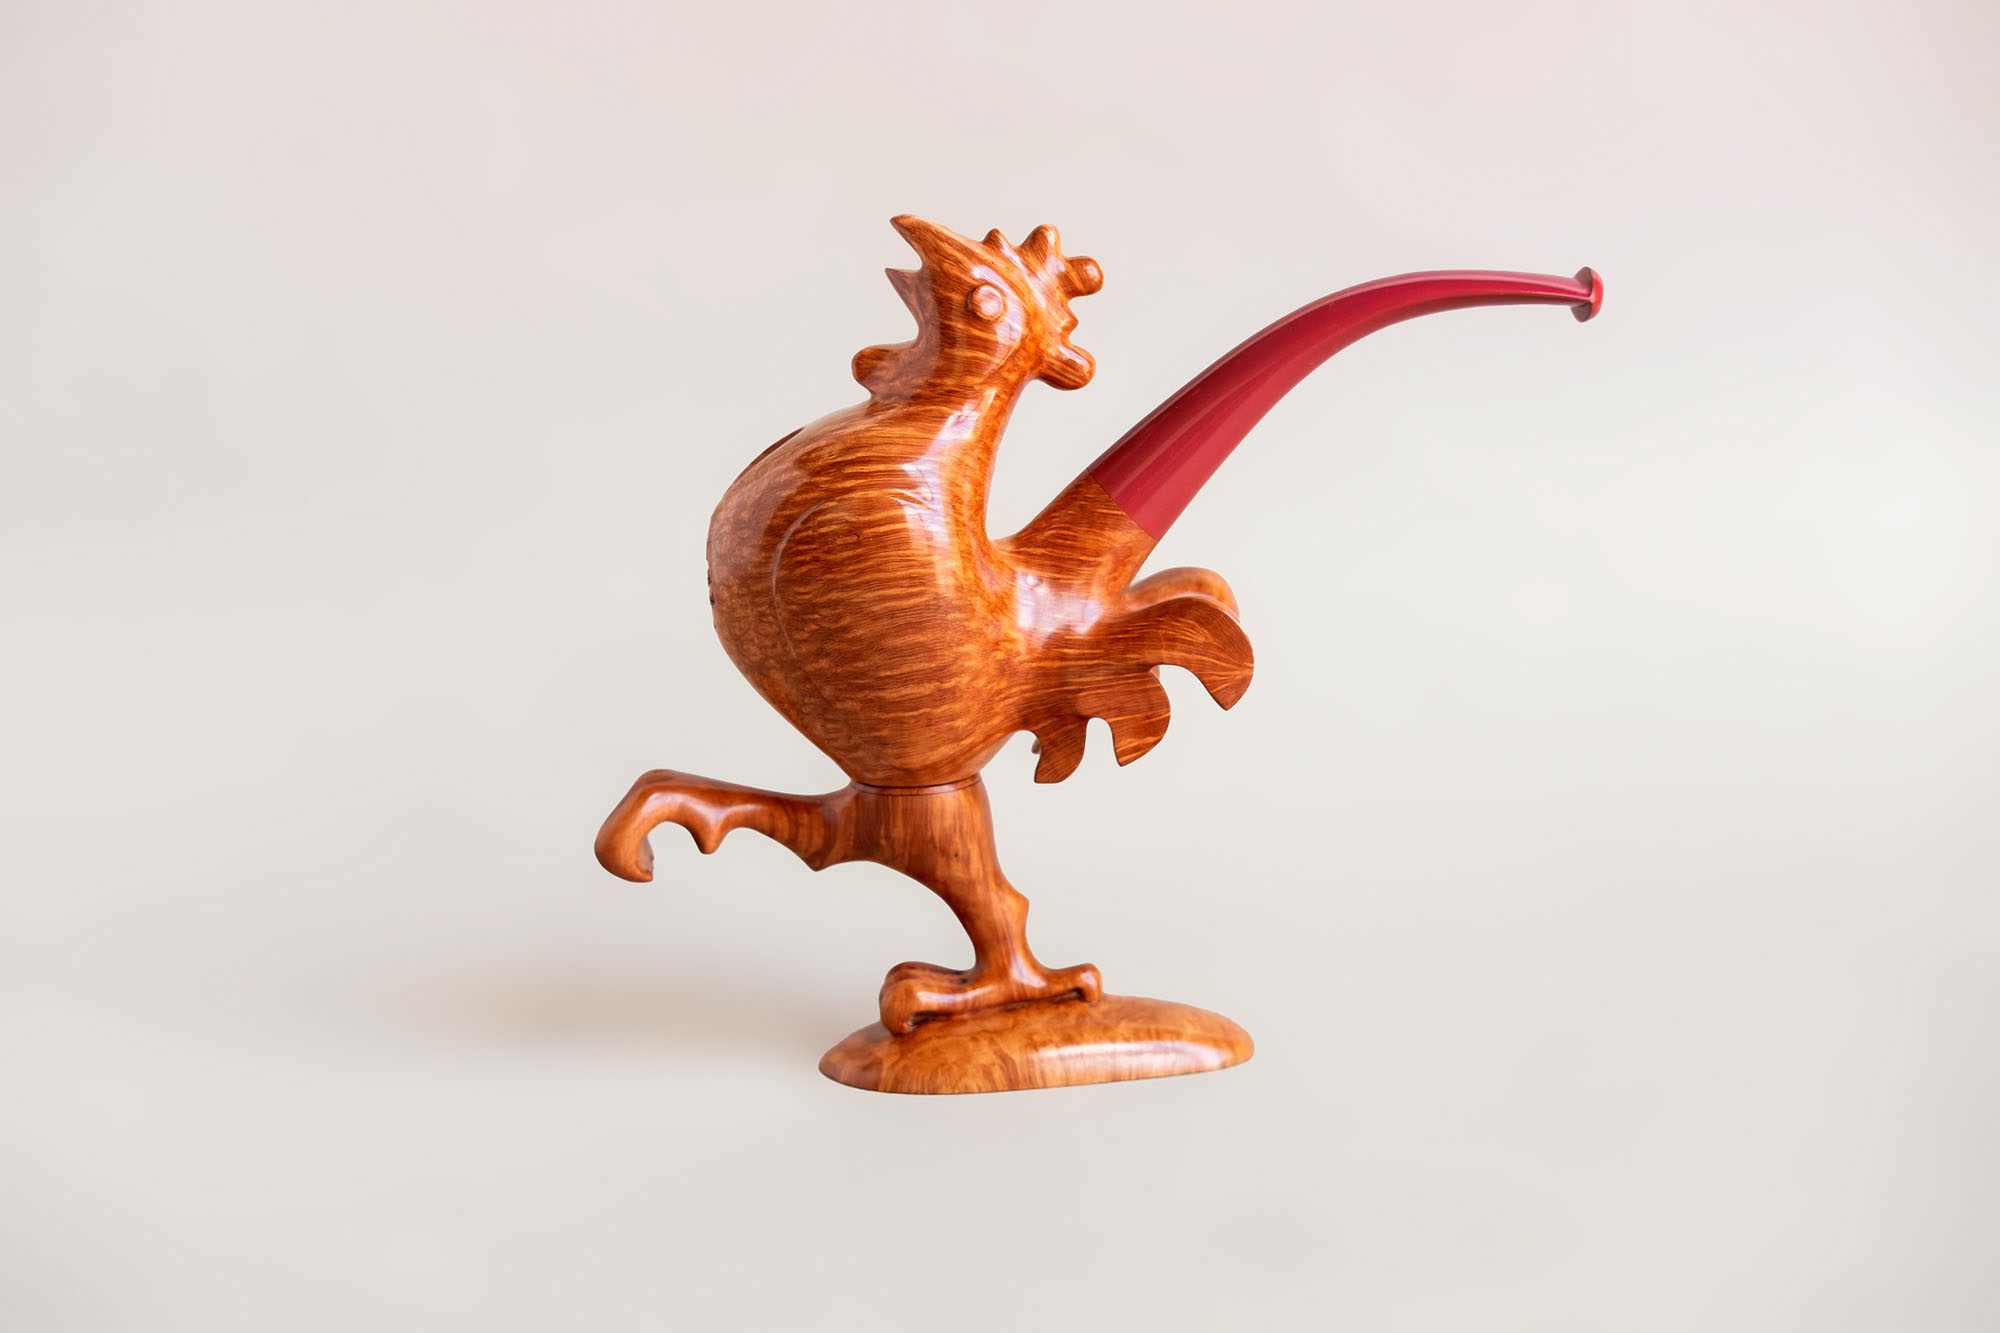 Rooster pipe, a sculptural smoking pipe hand crafted in briar by Arcangelo Ambrosi